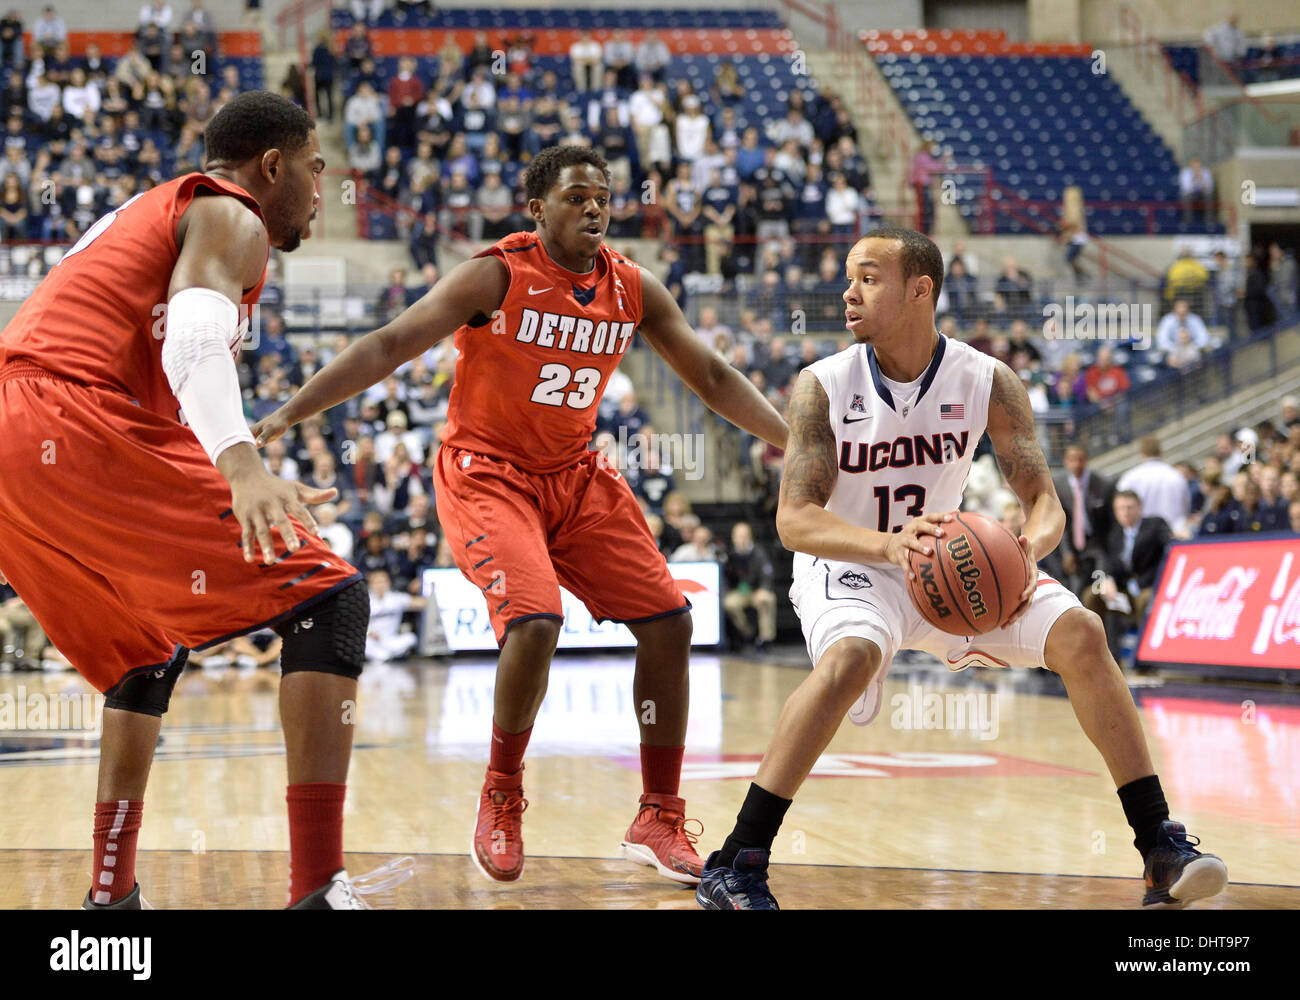 Storrs, CT, USA. 14th Nov, 2013. Thursday November 14, 2013: Connecticut Huskies guard Shabazz Napier (13) looks to pass the ball while being guarded by Detroit Titans center Ugochukwu Njoku (15) and Detroit Titans guard Carlton Brundidge (23) during the 1st half of the NCAA basketball game between Detroit and Connecticut at Gampel Pavilion in Storrs, CT. UConn went on to beat Detroit very easily 101-55. Bill Shettle / Cal Sport Media. Credit:  csm/Alamy Live News Stock Photo